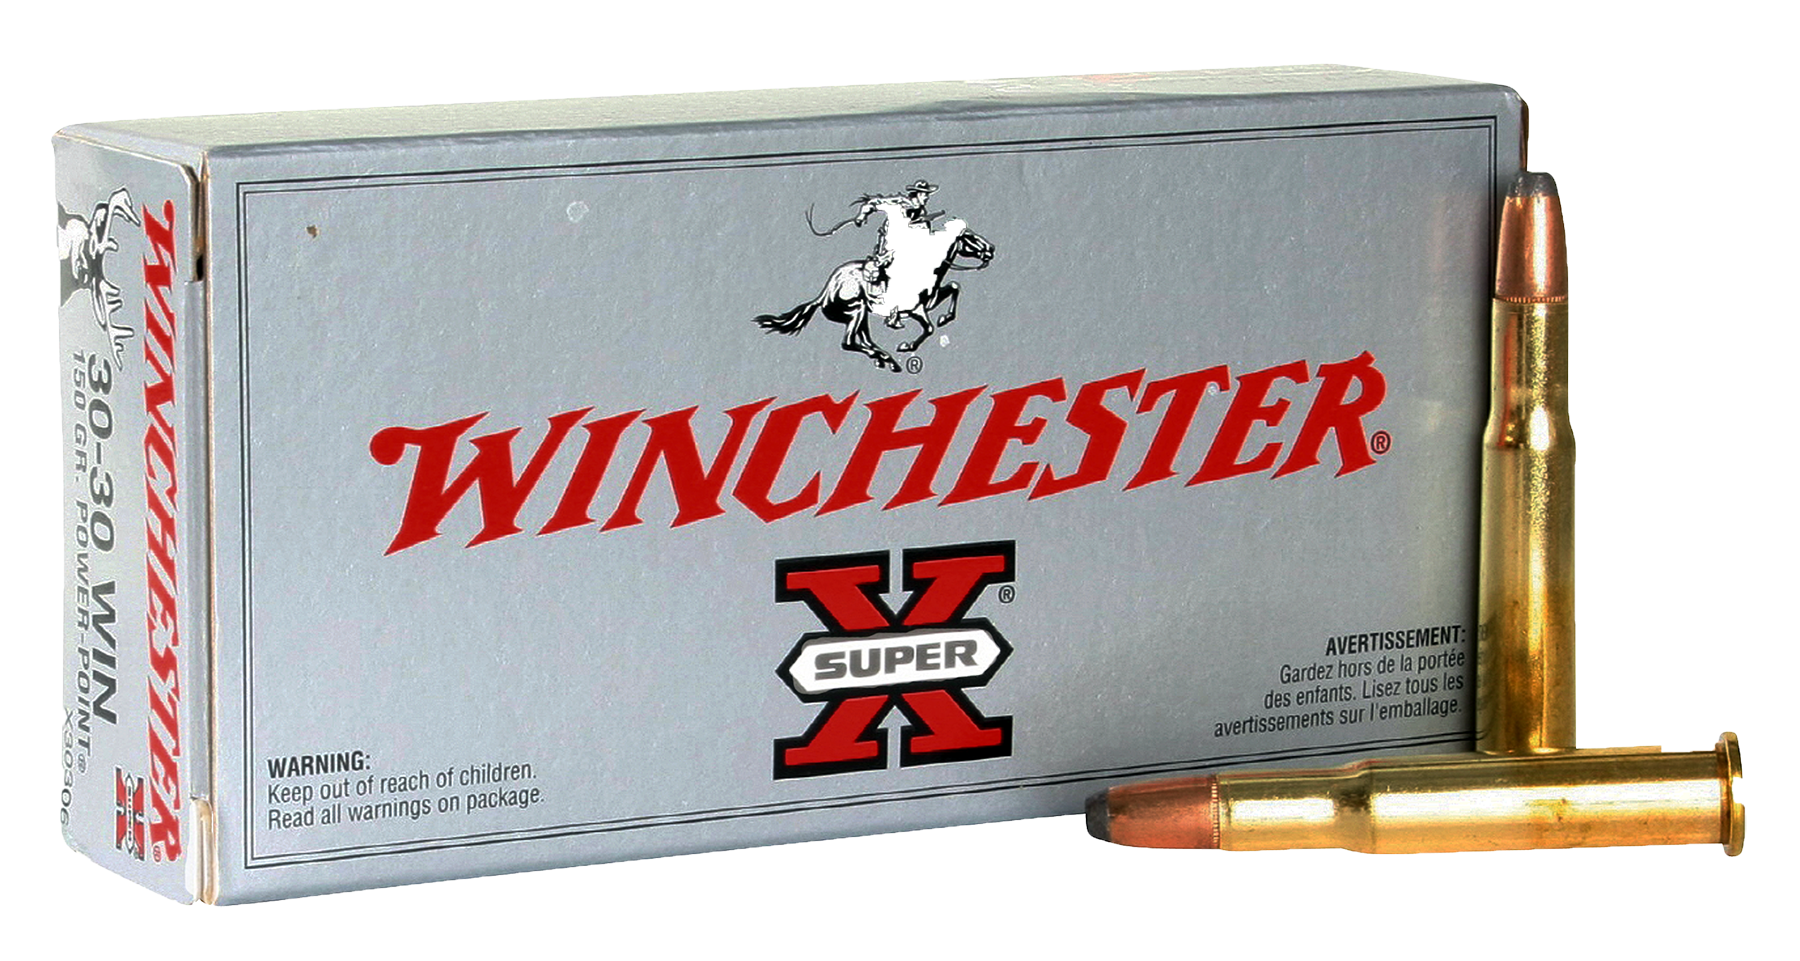 Ammo Super-X Winchester Power-Point Ammo